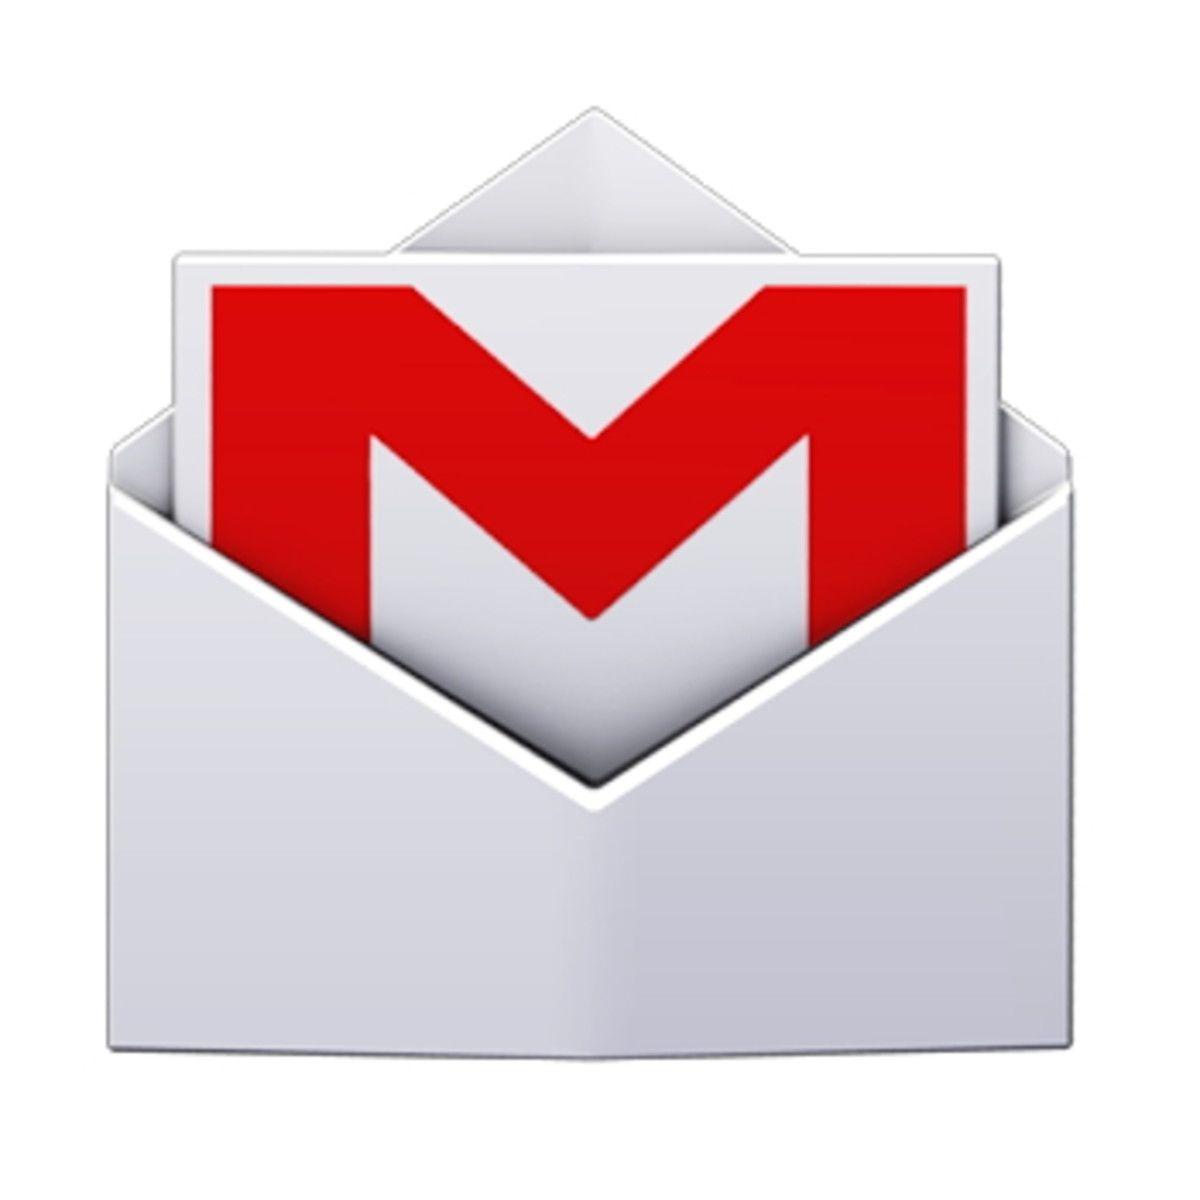 gmail app tile for windows 10 free download